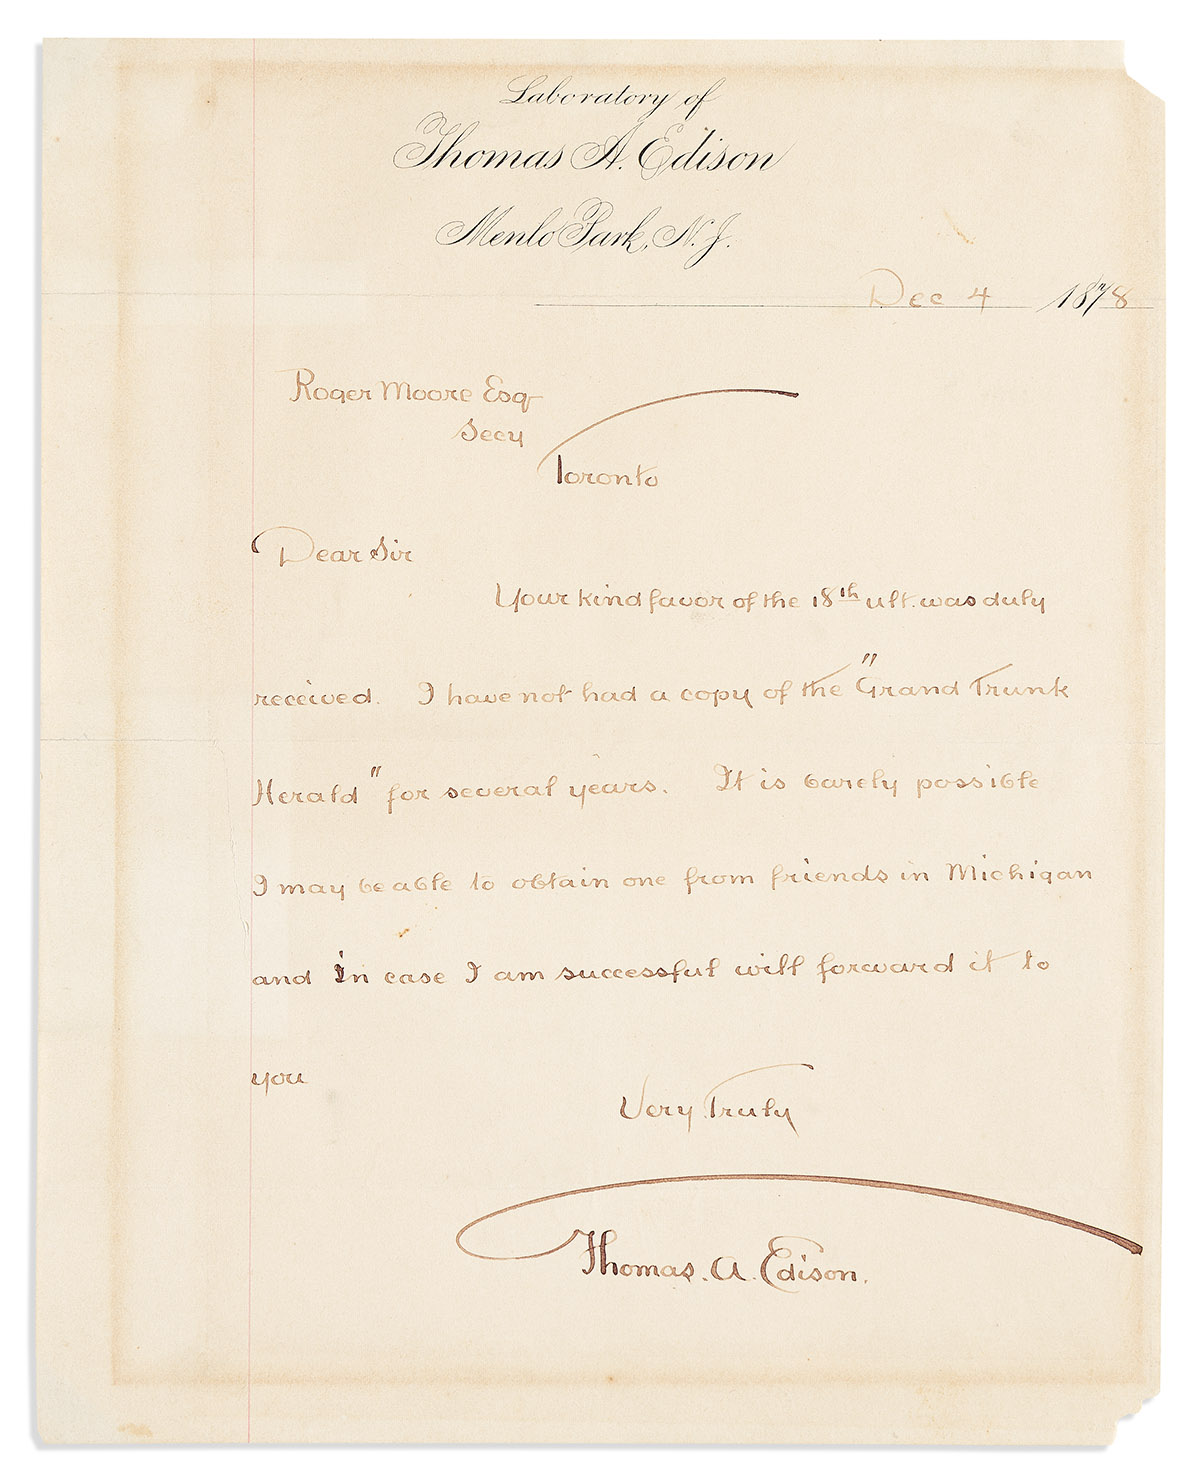 EDISON, THOMAS A. Autograph Letter Signed, to Roger Moore, hoping to find a copy of Grand Trunk Herald to send him.